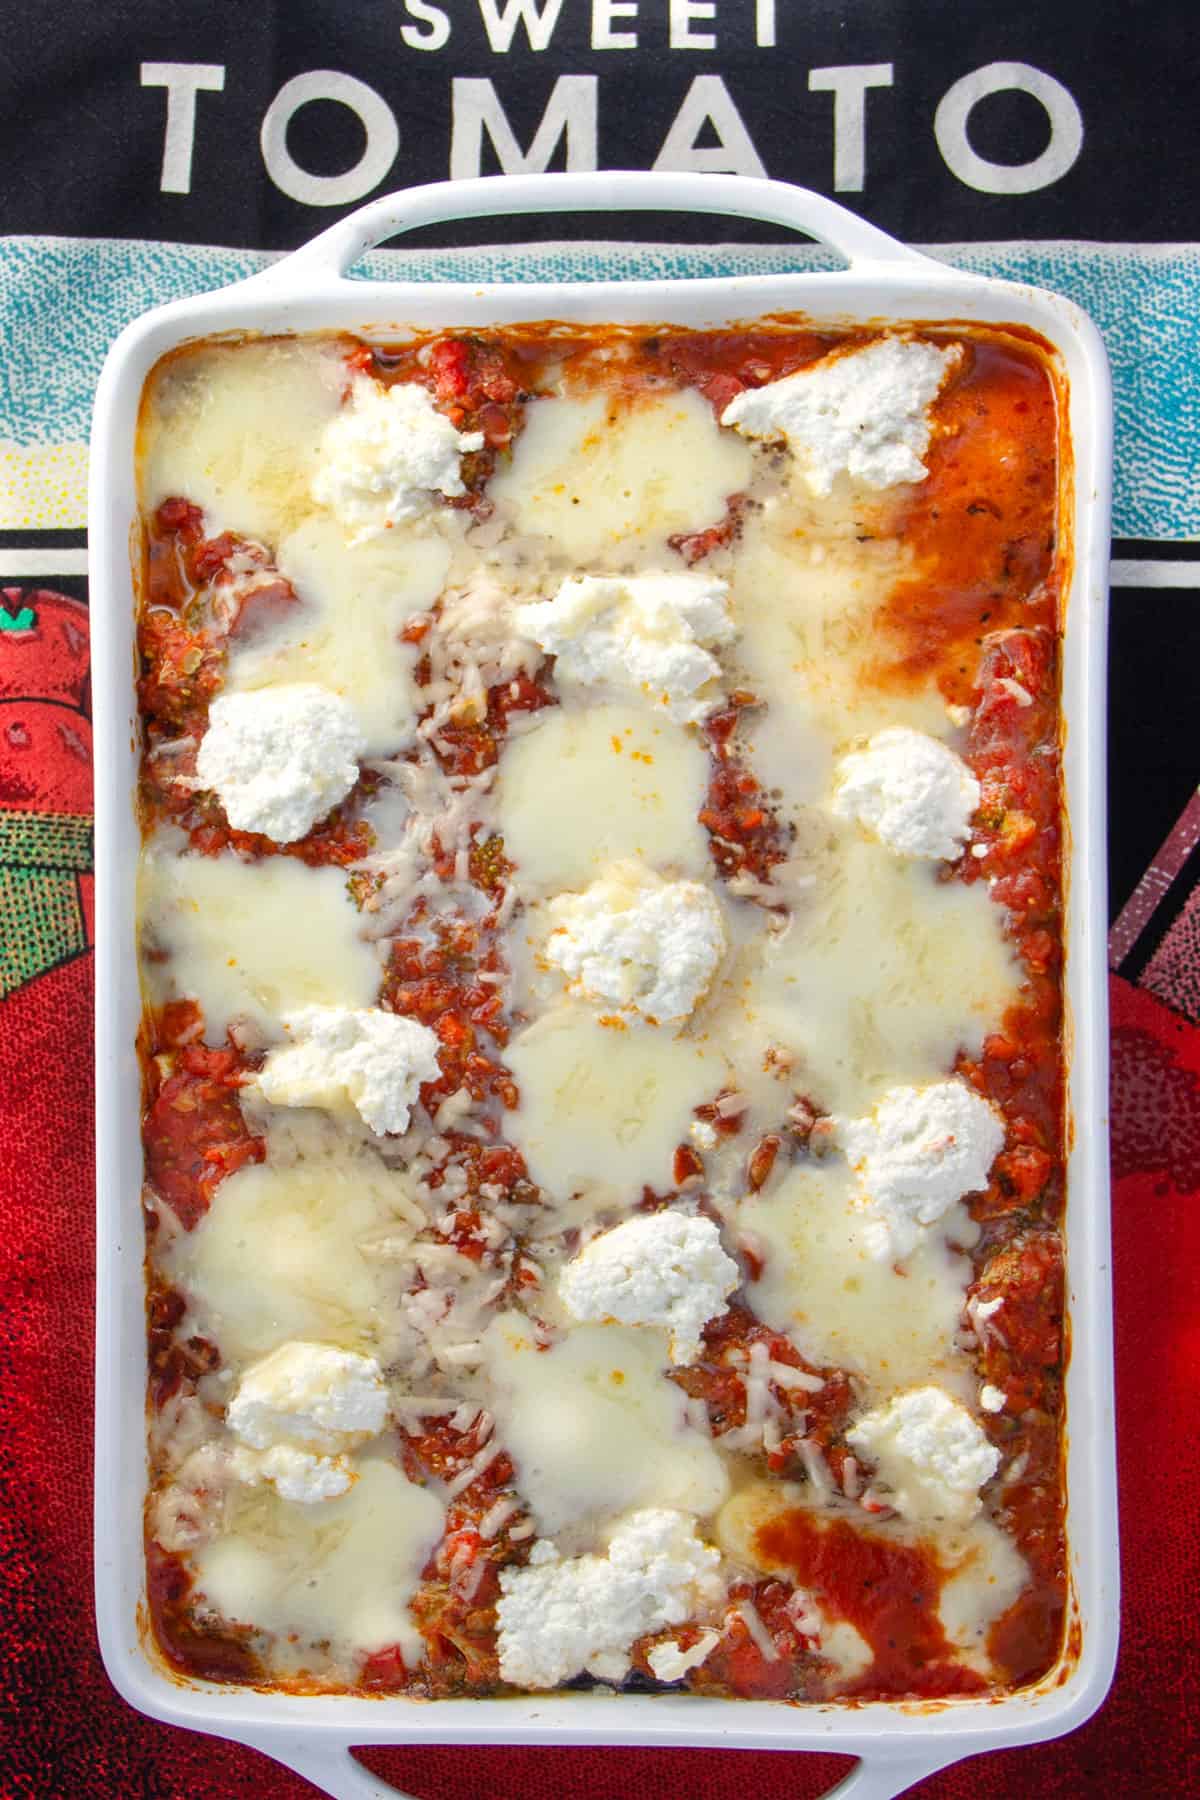 Rectangular casserole filled with eggplant lasagna, melting mozzarella on top with blobs of fluffy ricotta cheese and a sprinkling of parmesan.